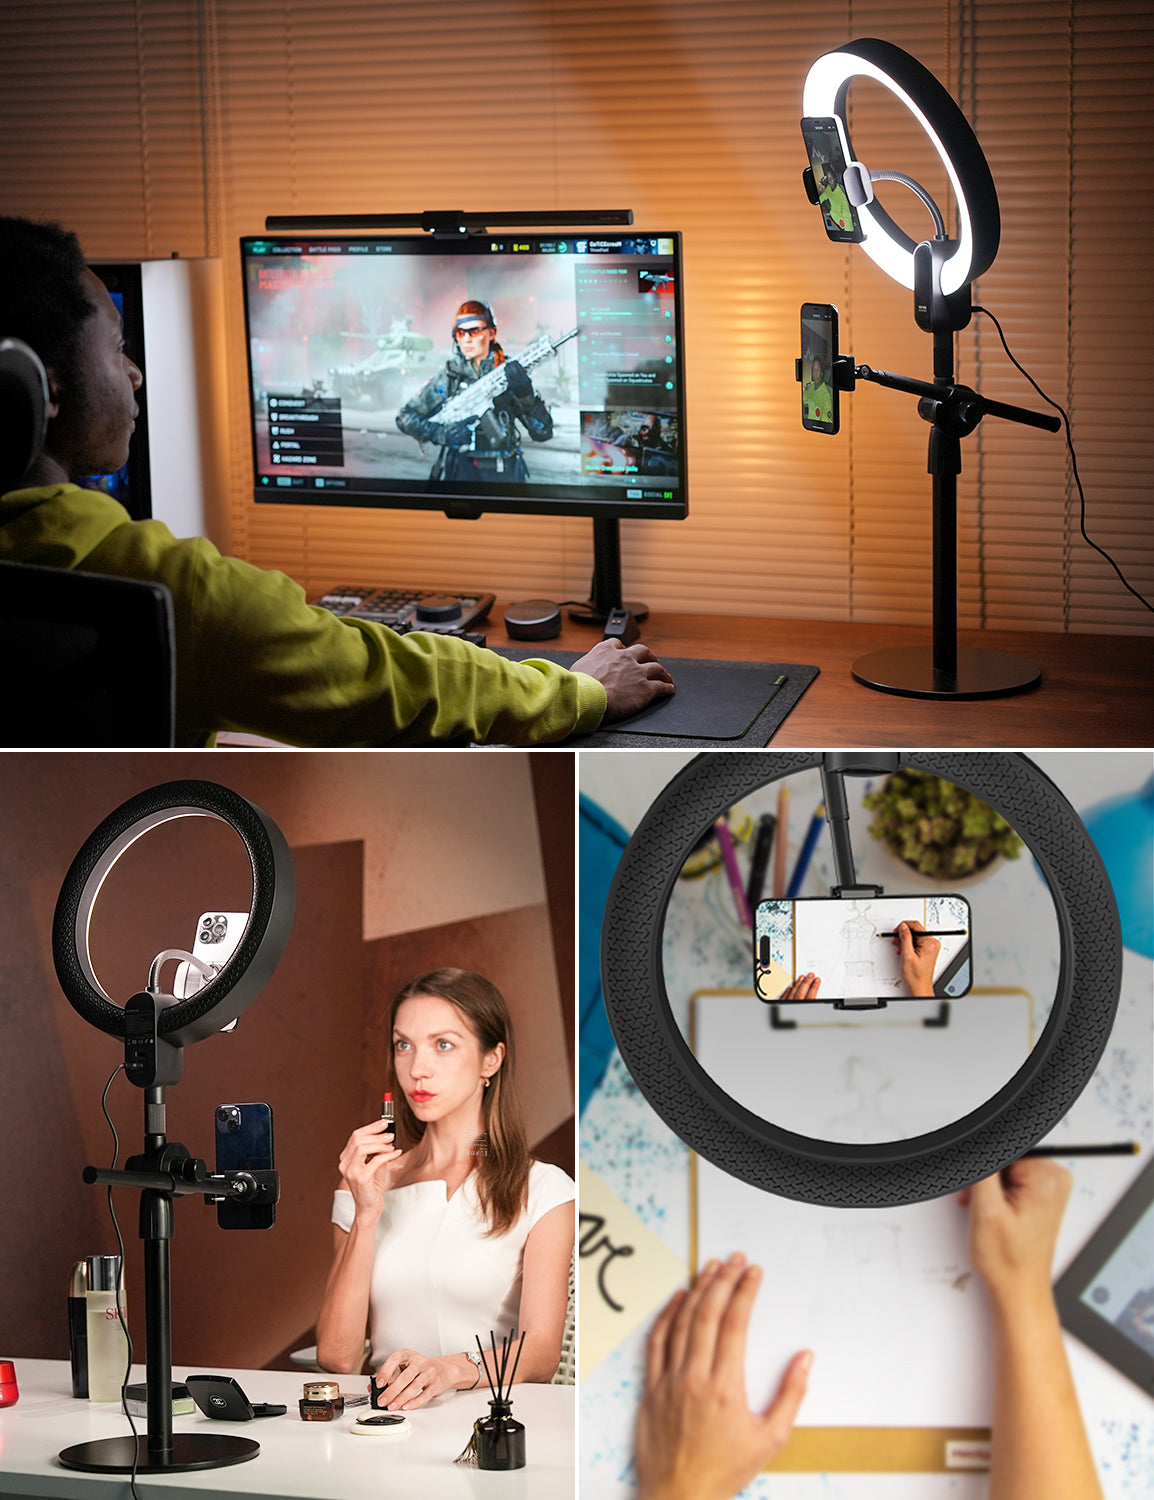  Viozon Selfie Desktop Live Stand Set 12 LED Ring Light 5 in 1  Monitor Laptop Arm Overhead Recording Height&Angle Adjustable Compatible  with 17-32Monitor3.5-6.7Phone/Camera for Live Steaming Gaming :  Electronics